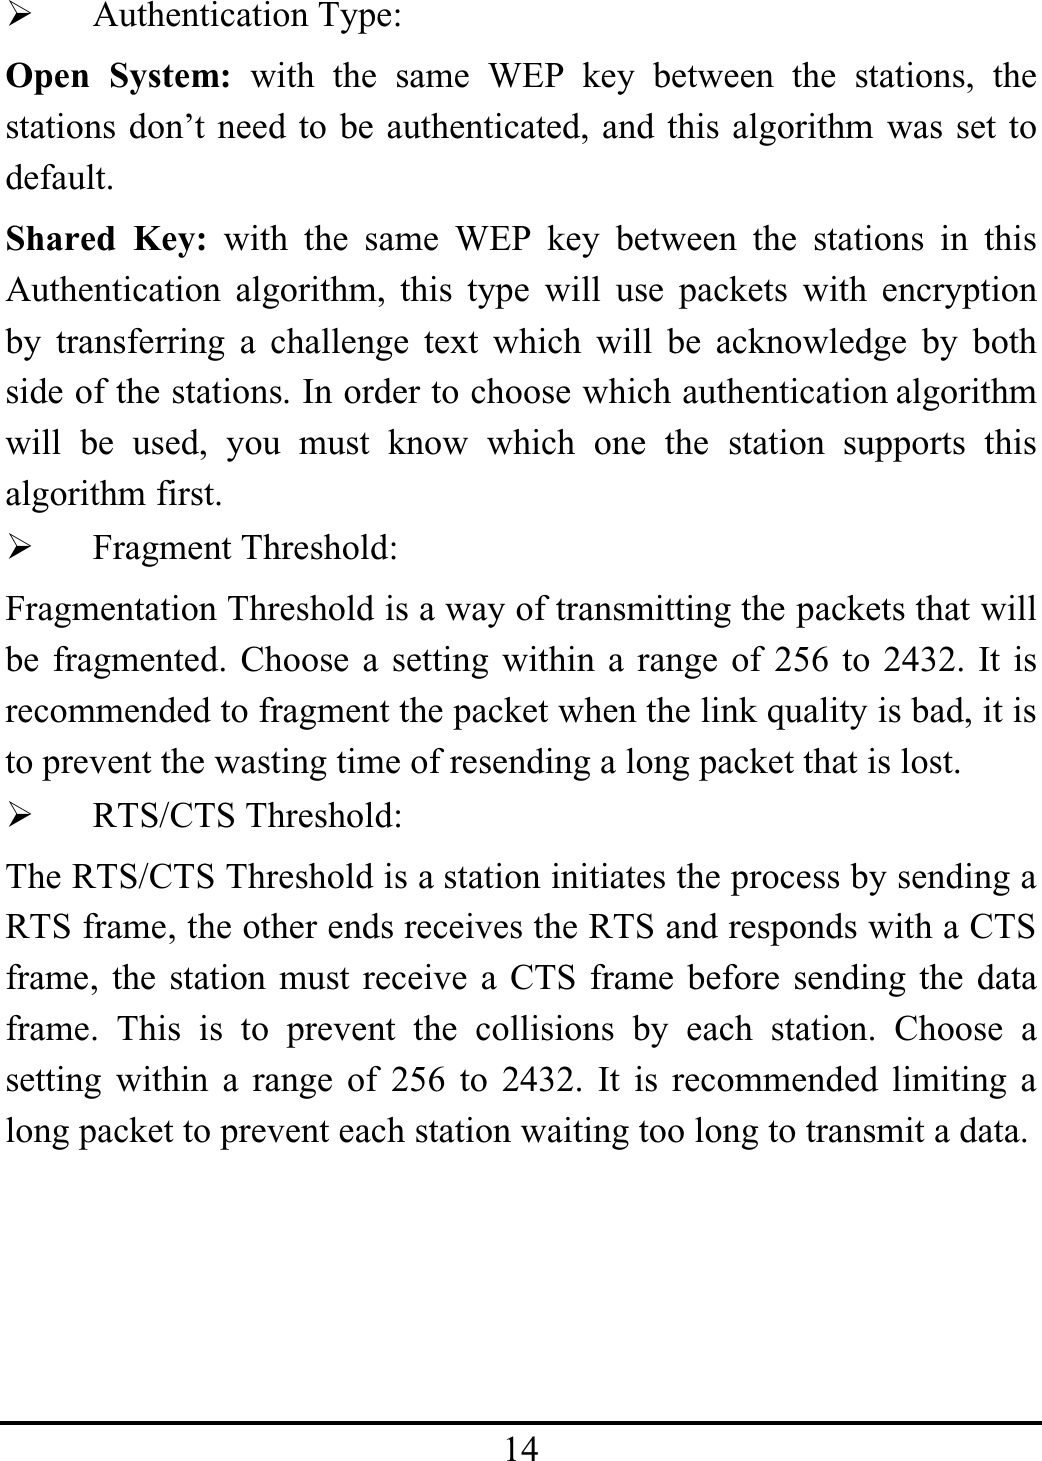 14¾Authentication Type:Open System: with the same WEP key between the stations, thestations don’t need to be authenticated, and this algorithm was set todefault.Shared Key: with the same WEP key between the stations in thisAuthentication algorithm, this type will use packets with encryptionby transferring a challenge text which will be acknowledge by bothside of the stations. In order to choose which authentication algorithmwill be used, you must know which one the station supports thisalgorithm first.¾Fragment Threshold:Fragmentation Threshold is a way of transmitting the packets that willbe fragmented. Choose a setting within a range of 256 to 2432. It isrecommended to fragment the packet when the link quality is bad, it is to prevent the wasting time of resending a long packet that is lost.¾RTS/CTS Threshold:The RTS/CTS Threshold is a station initiates the process by sending a RTS frame, the other ends receives the RTS and responds with a CTS frame, the station must receive a CTS frame before sending the dataframe. This is to prevent the collisions by each station. Choose asetting within a range of 256 to 2432. It is recommended limiting along packet to prevent each station waiting too long to transmit a data.